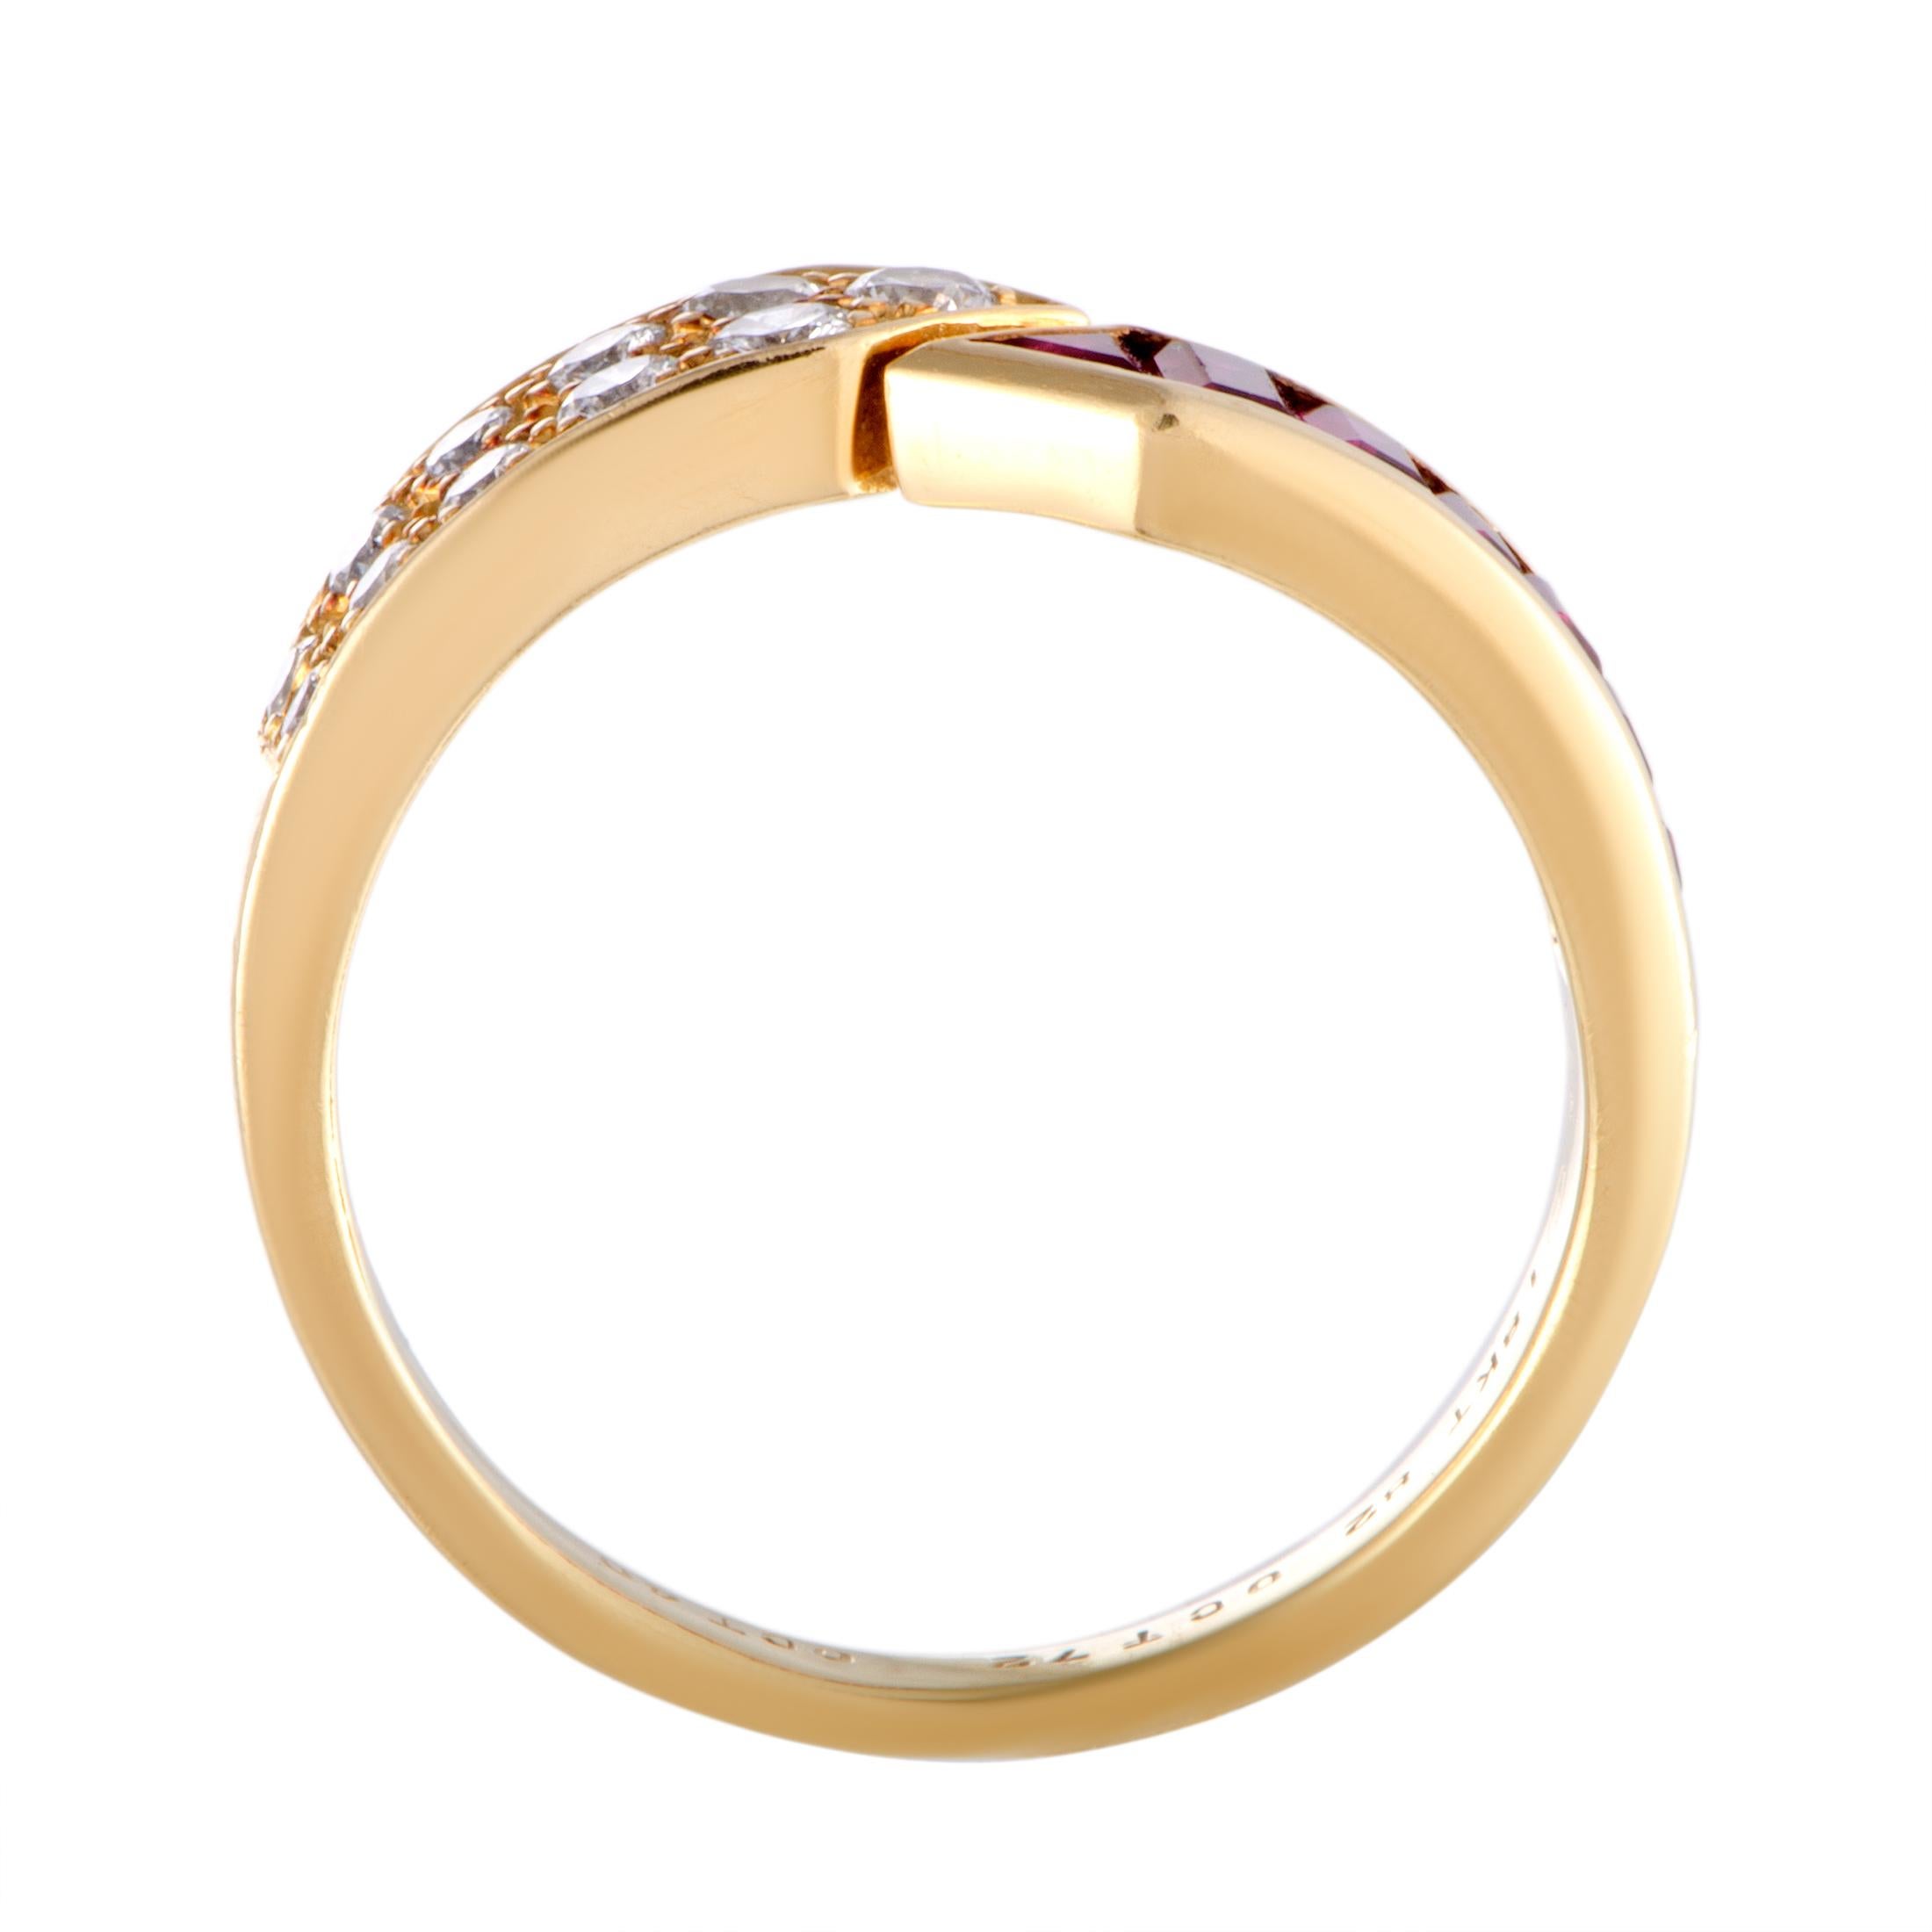 Add a splendidly feminine touch to your ensemble with this gorgeous Van Cleef & Arpels ring made of 18K yellow gold that boasts elegant design topped off with resplendent diamonds and regal rubies. The rubies weigh 0.72 carats in total, while the